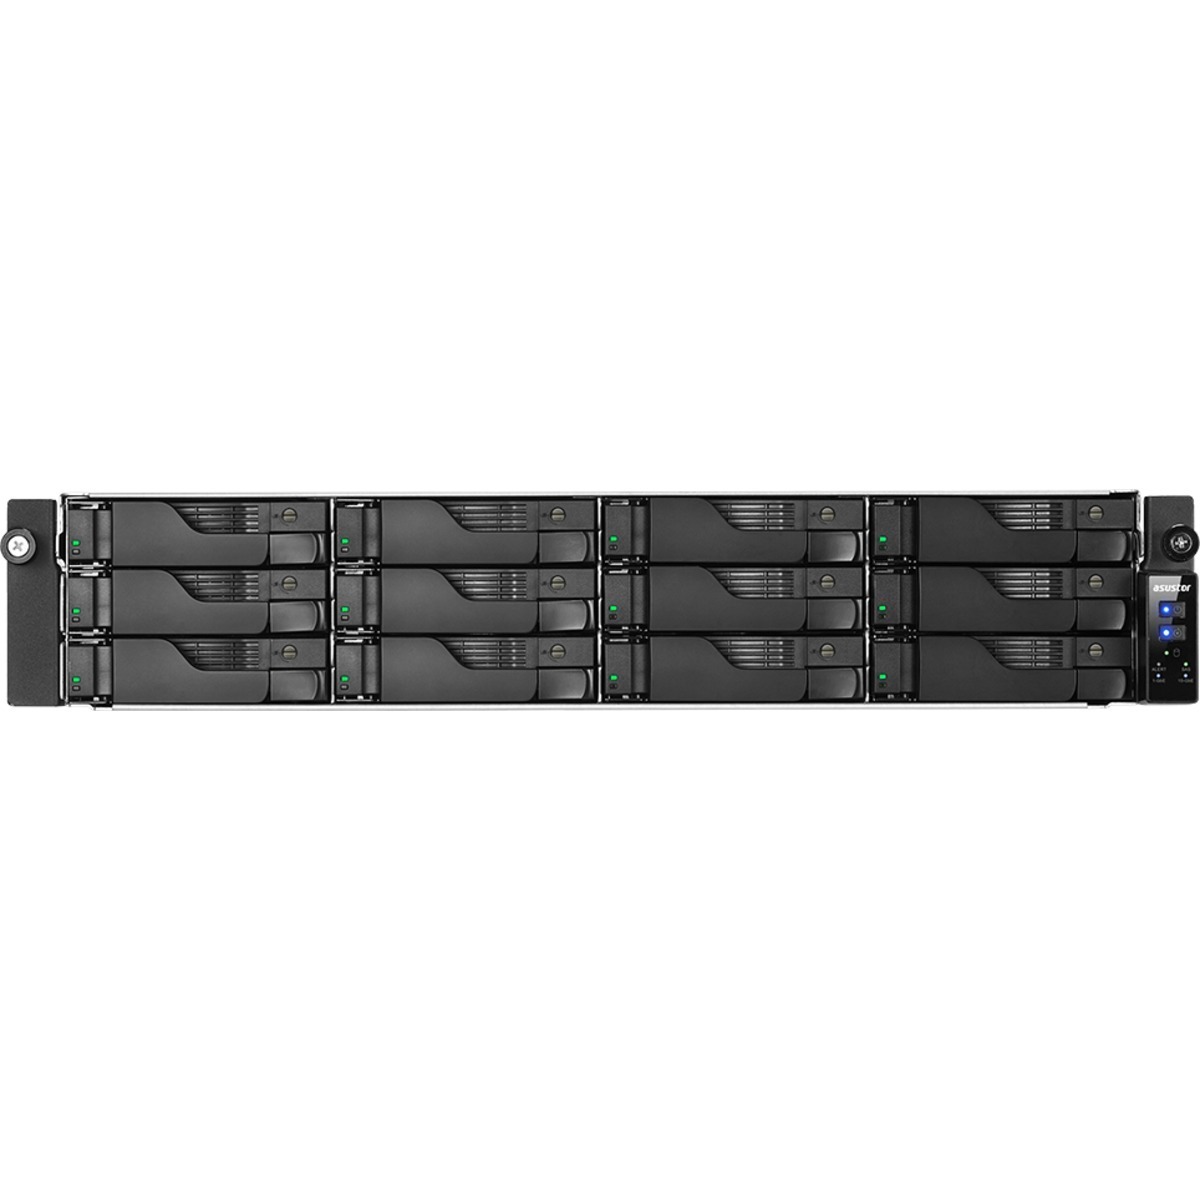 buy $5629 ASUSTOR AS7112RDX Lockerstor 12R Pro 72tb RackMount NAS - Network Attached Storage Device 12x6000gb Western Digital Blue WD60EZAZ 3.5 5400rpm SATA 6Gb/s HDD CONSUMER Class Drives Installed - Burn-In Tested - nas headquarters buy network attached storage server device das new raid-5 free shipping usa christmas new year holiday sale AS7112RDX Lockerstor 12R Pro